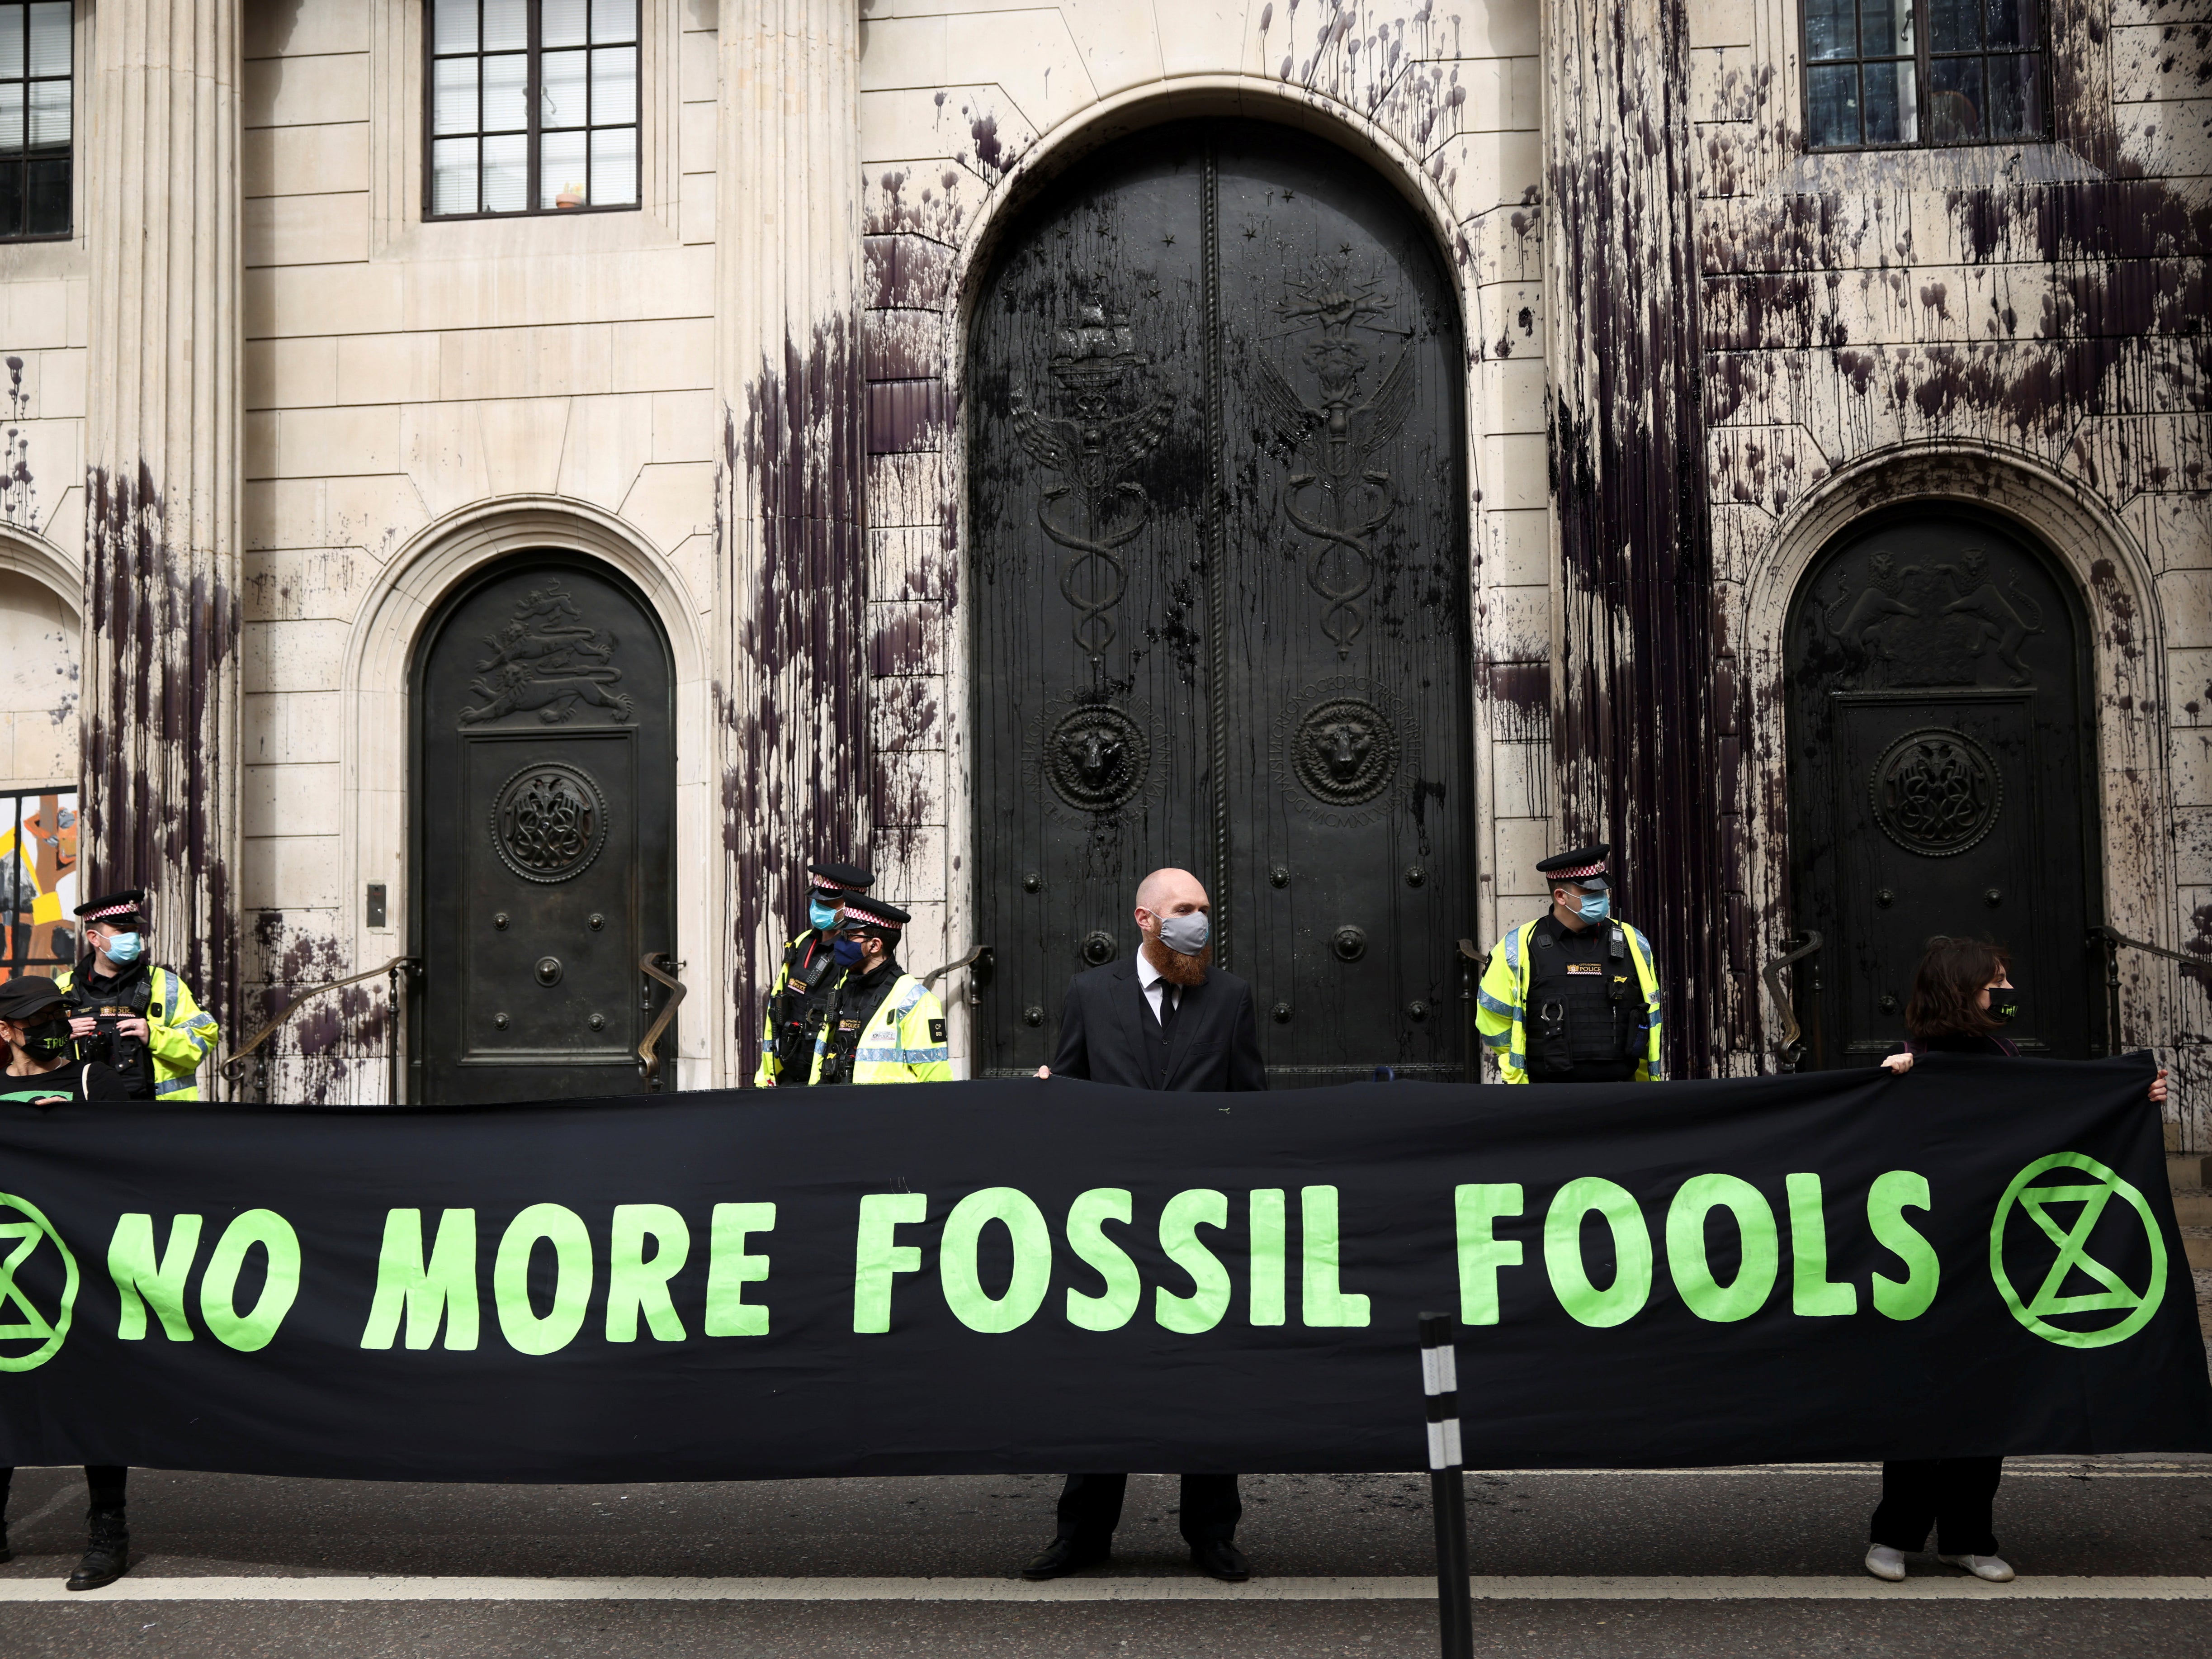 UK banks are coming under increasing scrutiny from climate groups such as Extinction Rebellion